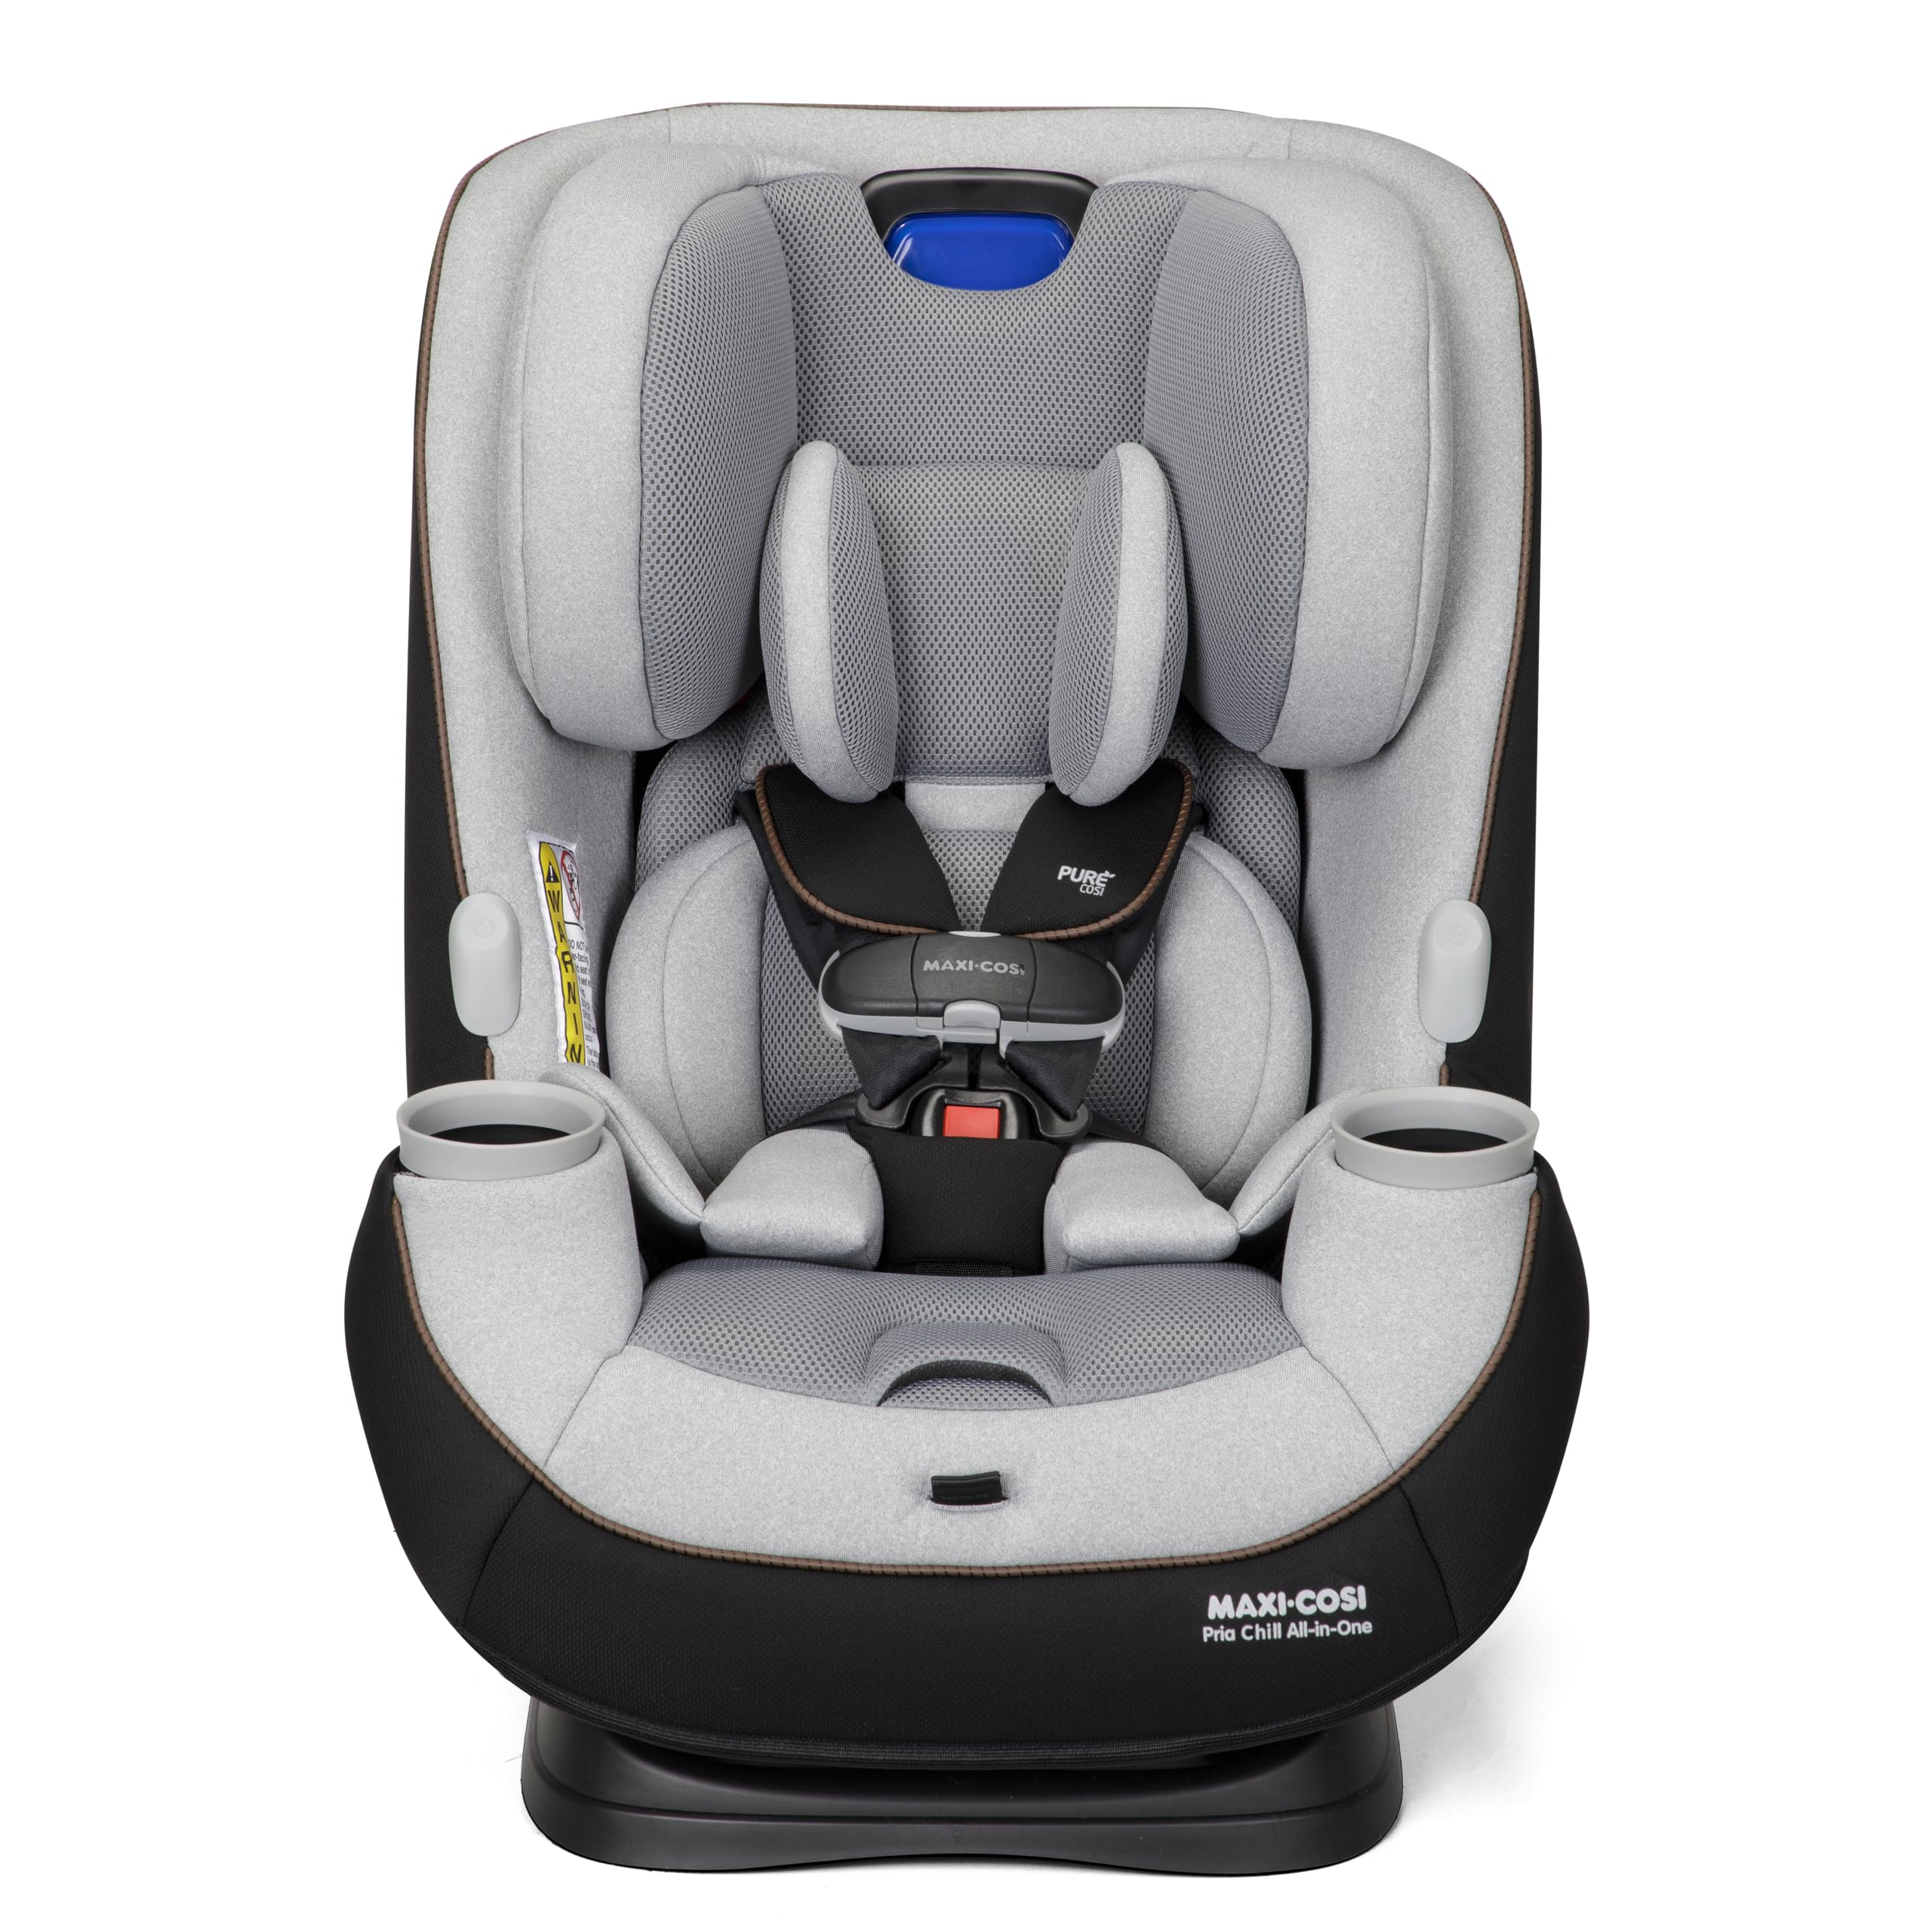 Maxi-Cosi Pria™ Chill All-in-One Convertible Car Seat with VentMax Fan System to Help Keep Baby Cool, Chill